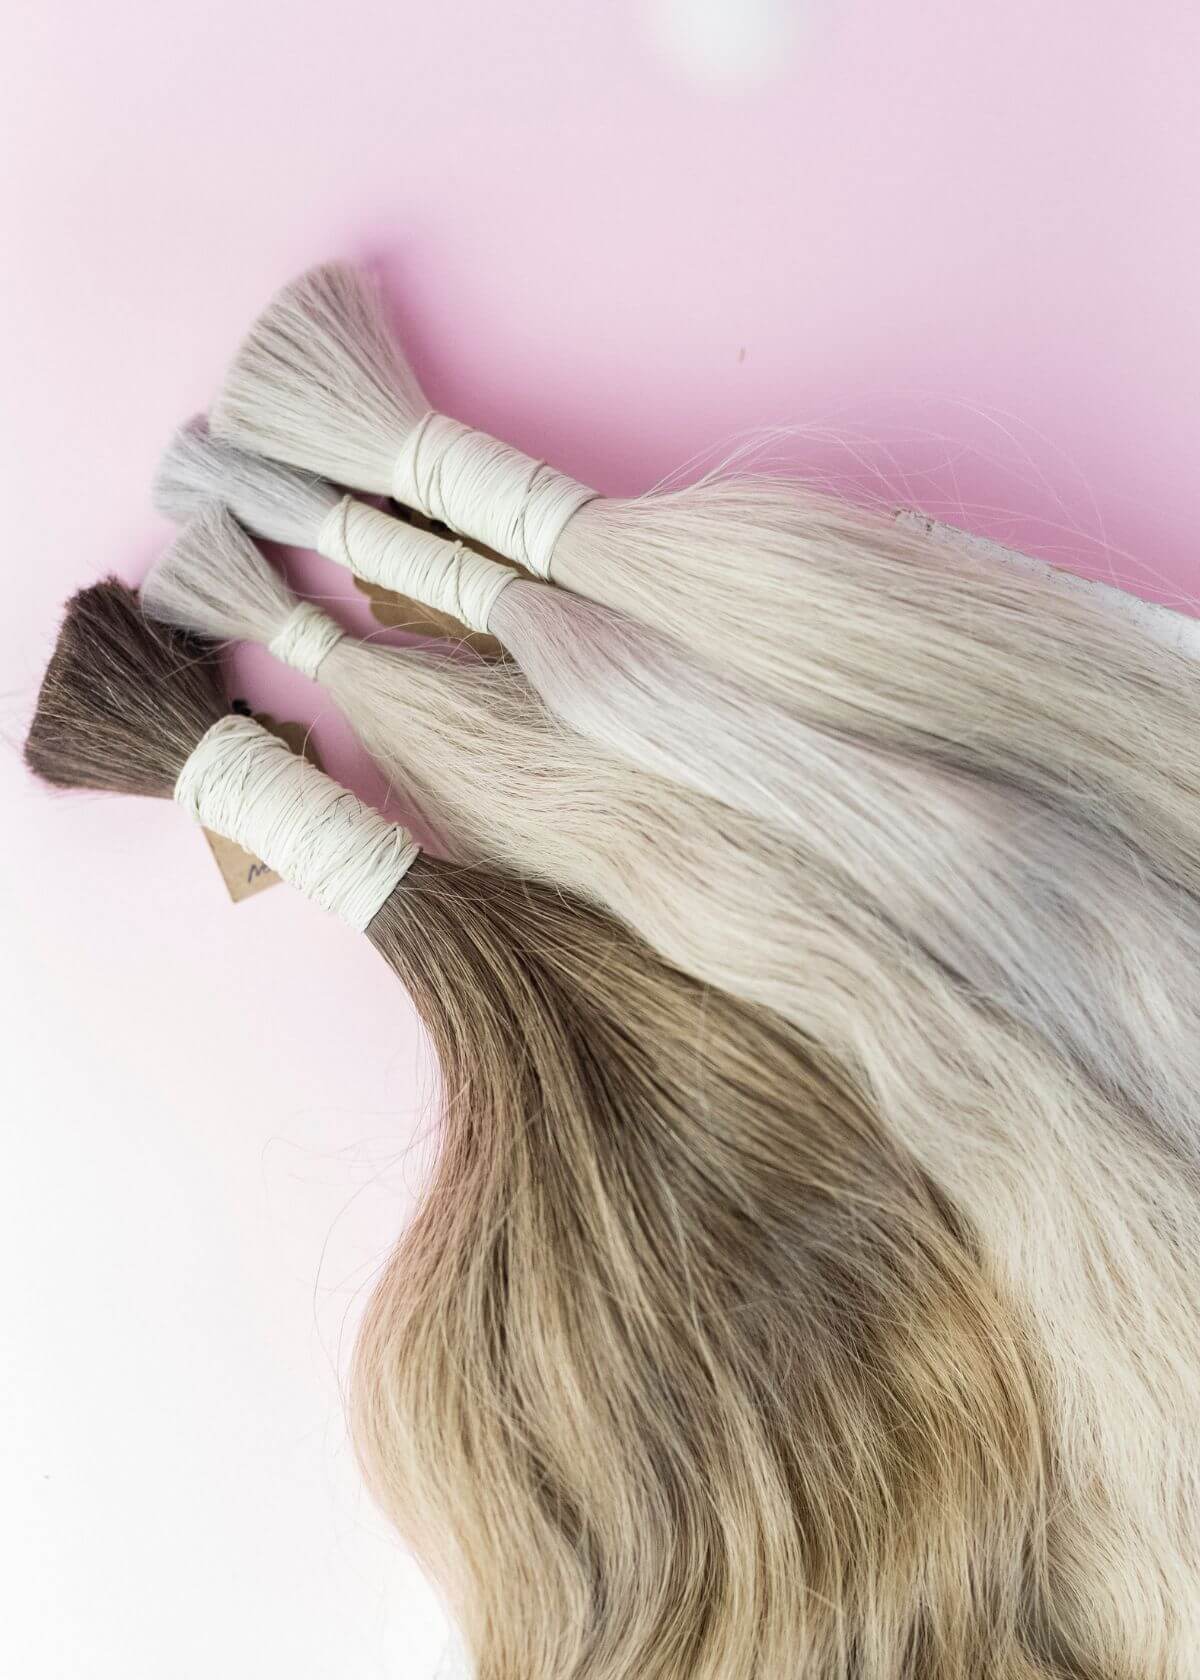 Can You use Normal Shampoo on Hair Extensions?